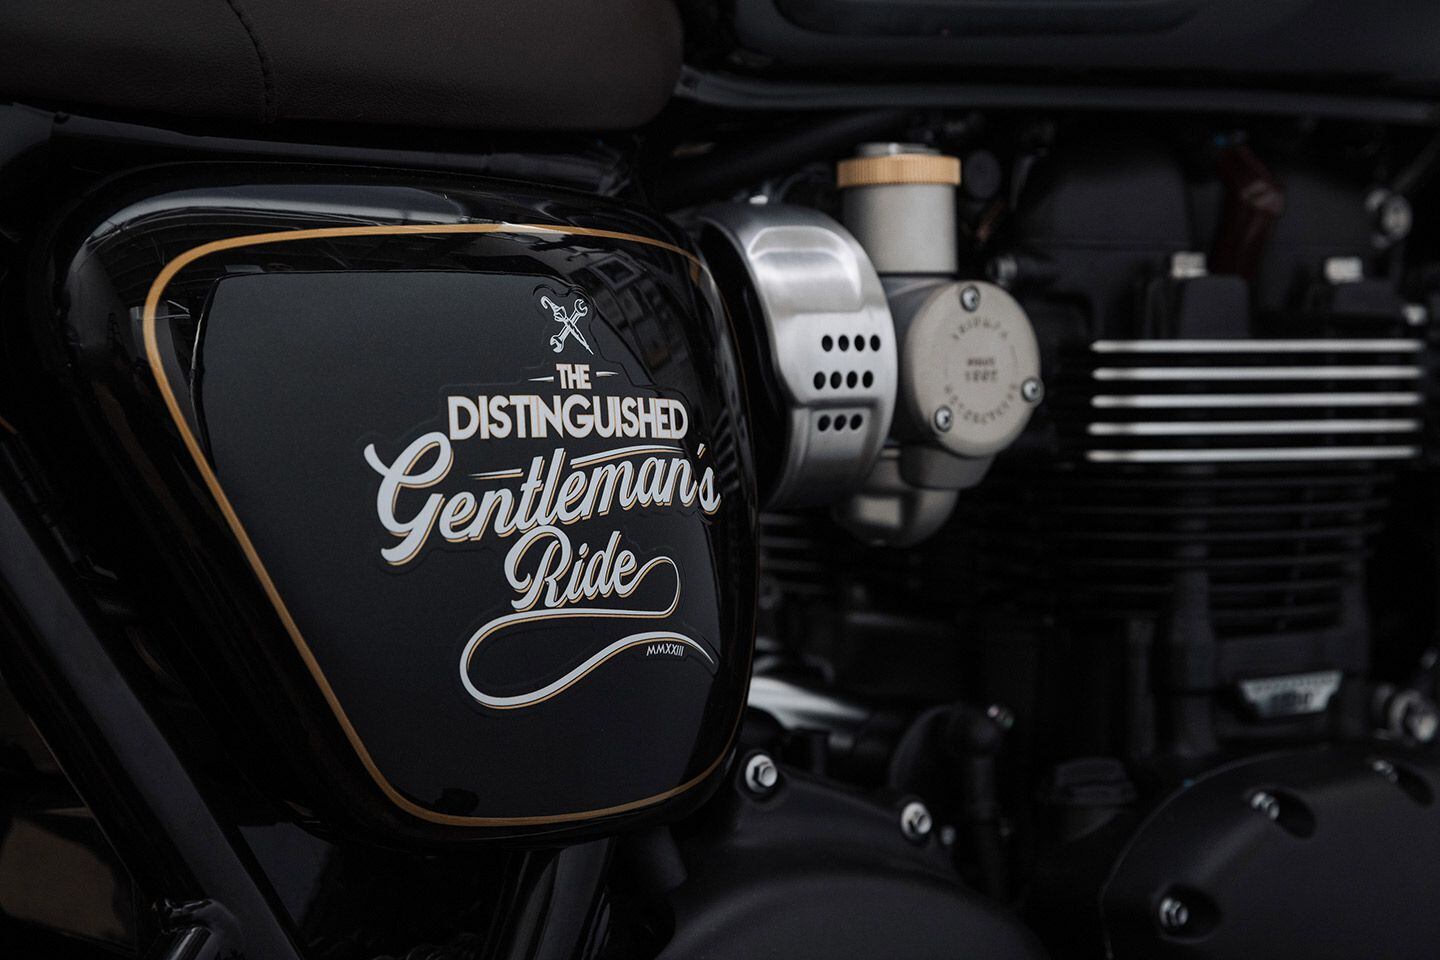 The side panels feature a more prominent DGR logo treatment framed by pinstripes. The umbrella and wrench will likely get more than a few questions from bystanders.